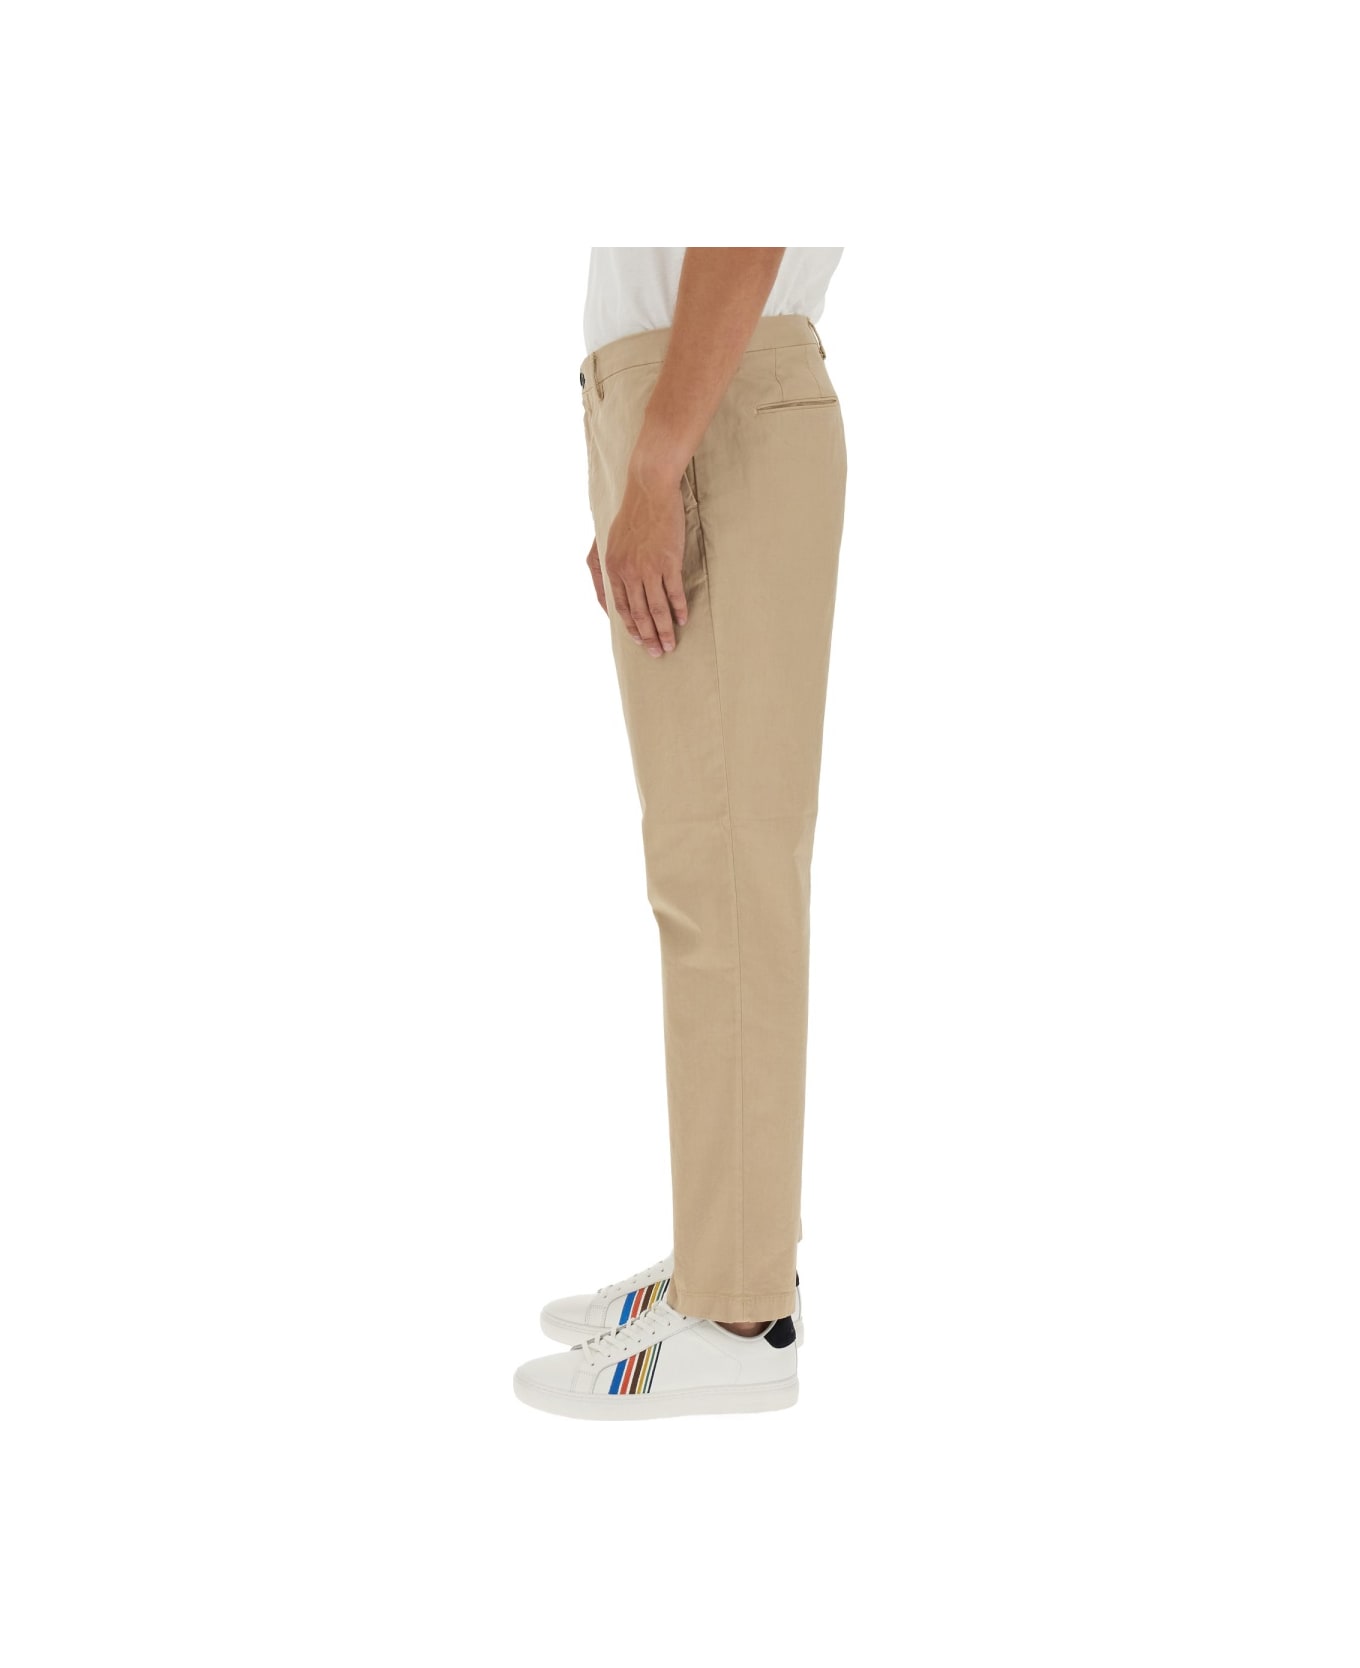 PS by Paul Smith Regular Fit Pants - BEIGE